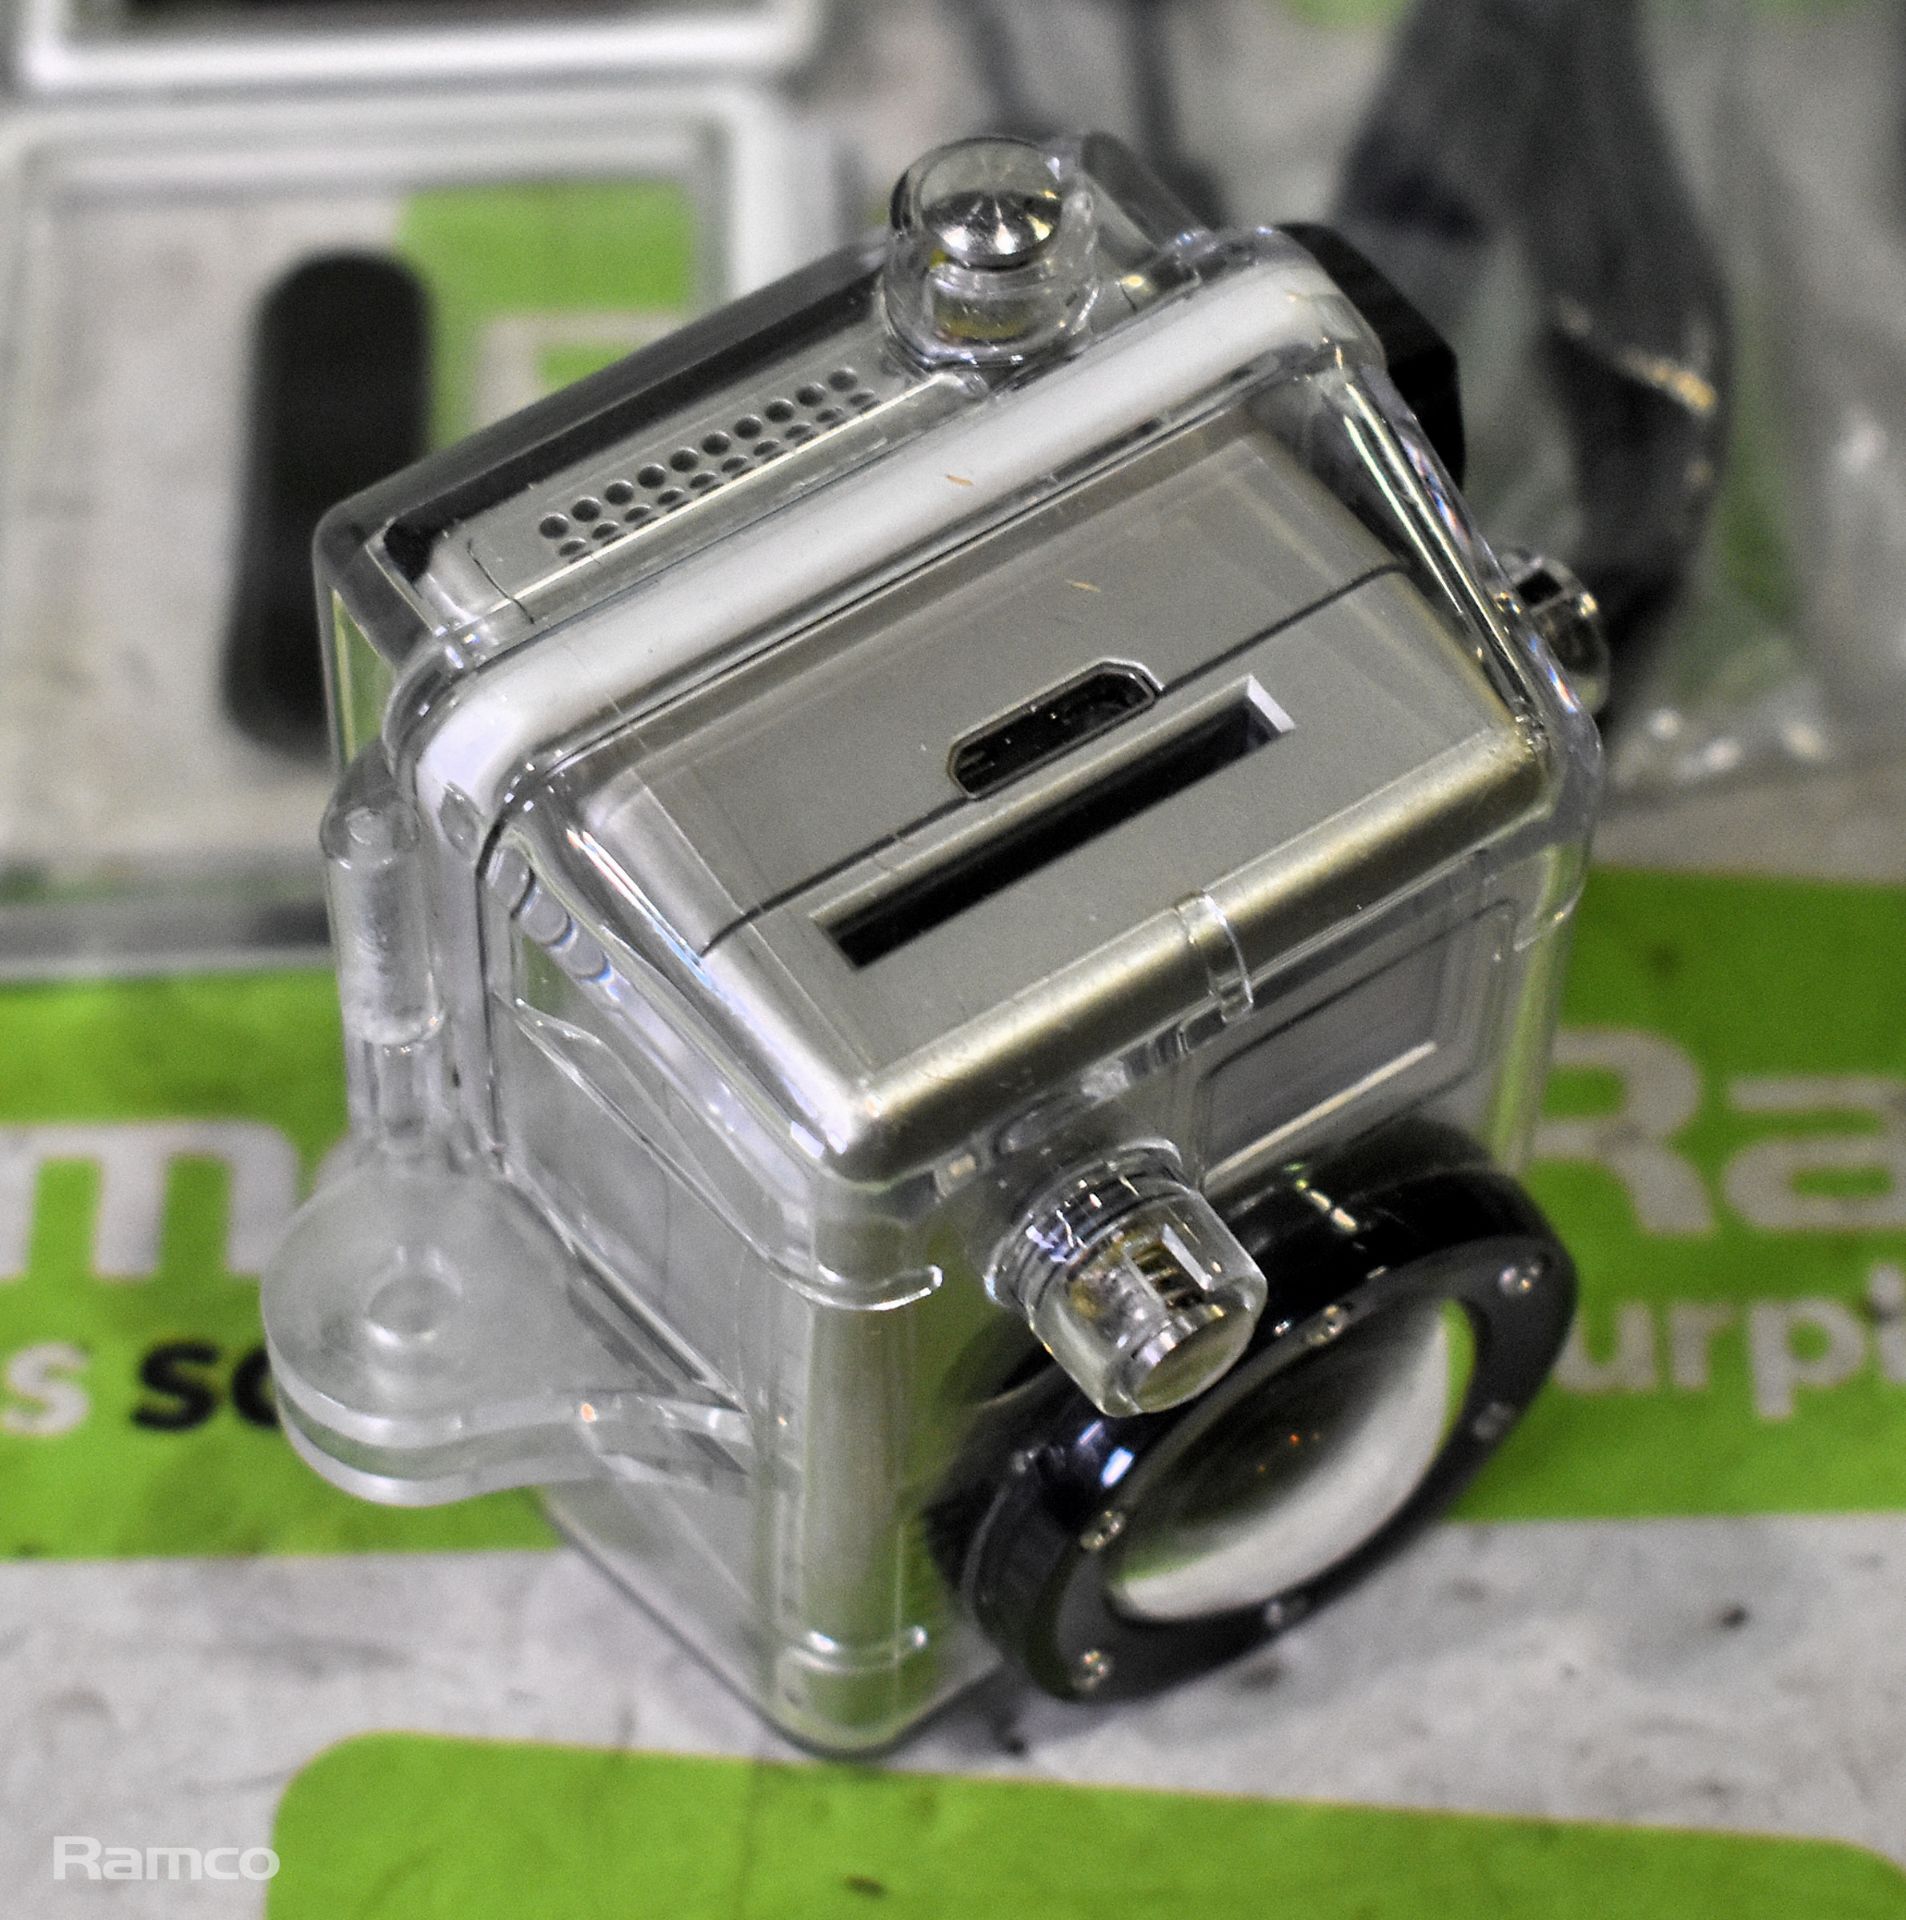 2x GoPro Hero2s with spares (assorted) - Image 8 of 8